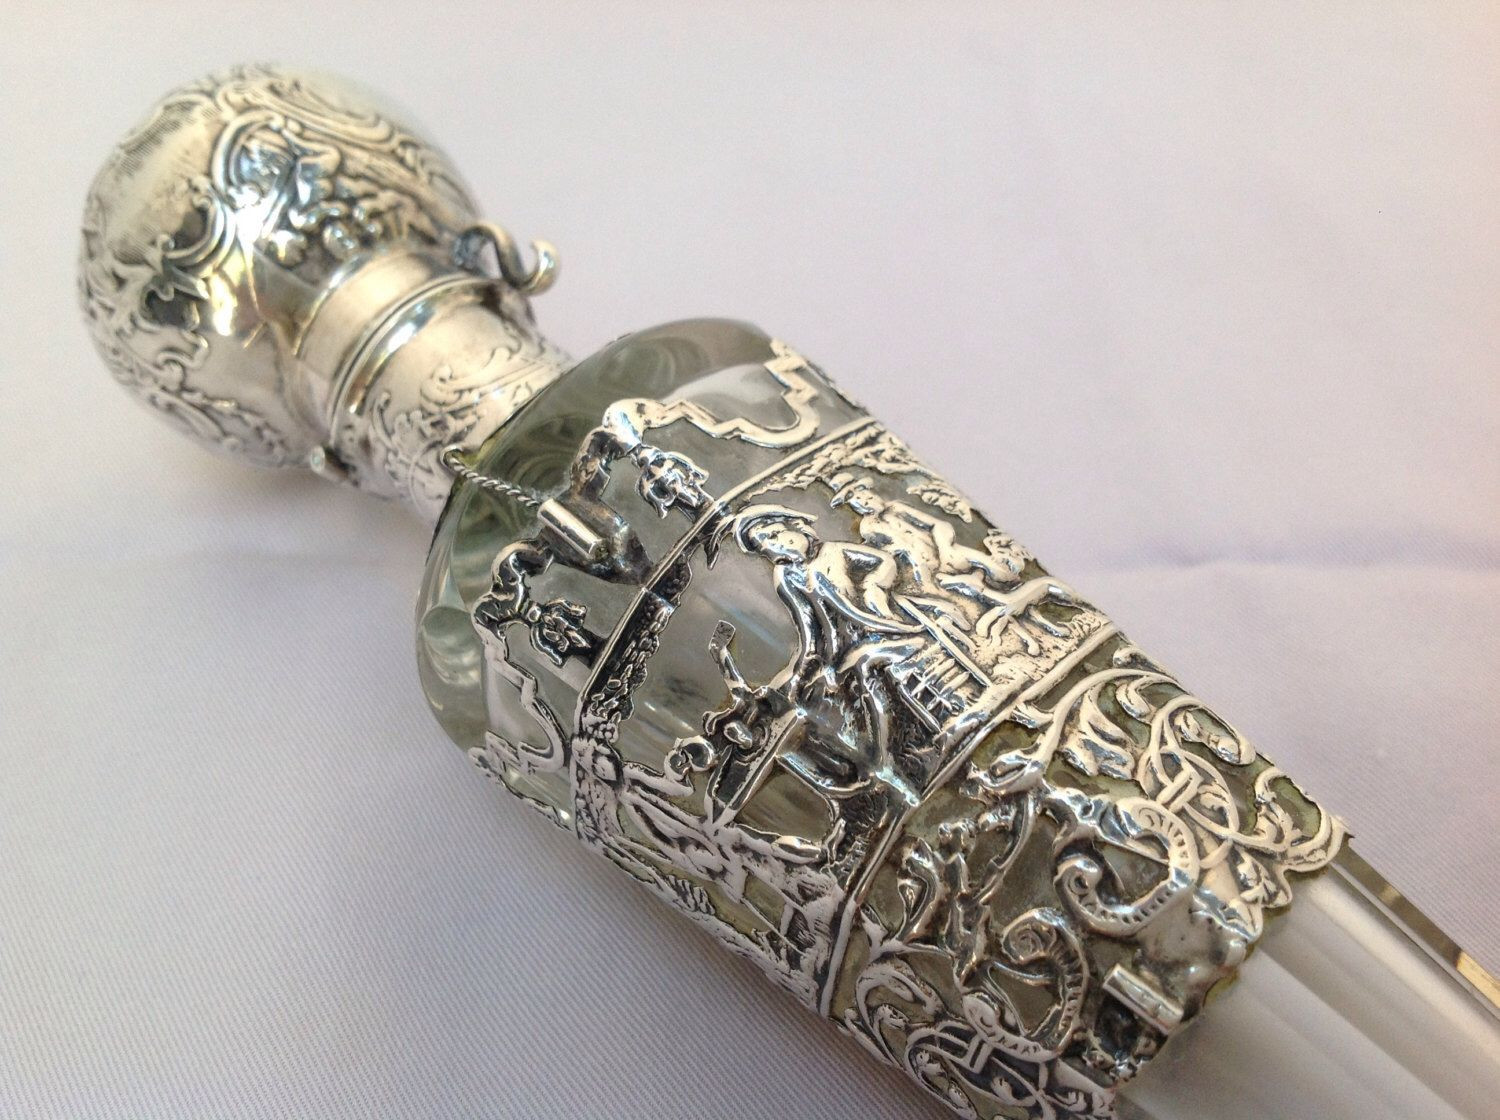 28 Famous Sterling Silver Bud Vase 2024 free download sterling silver bud vase of antique perfume bottle sterling lay down perfume bottle 19th century with regard to antique perfume bottle sterling lay down perfume bottle 19th century by peetsl